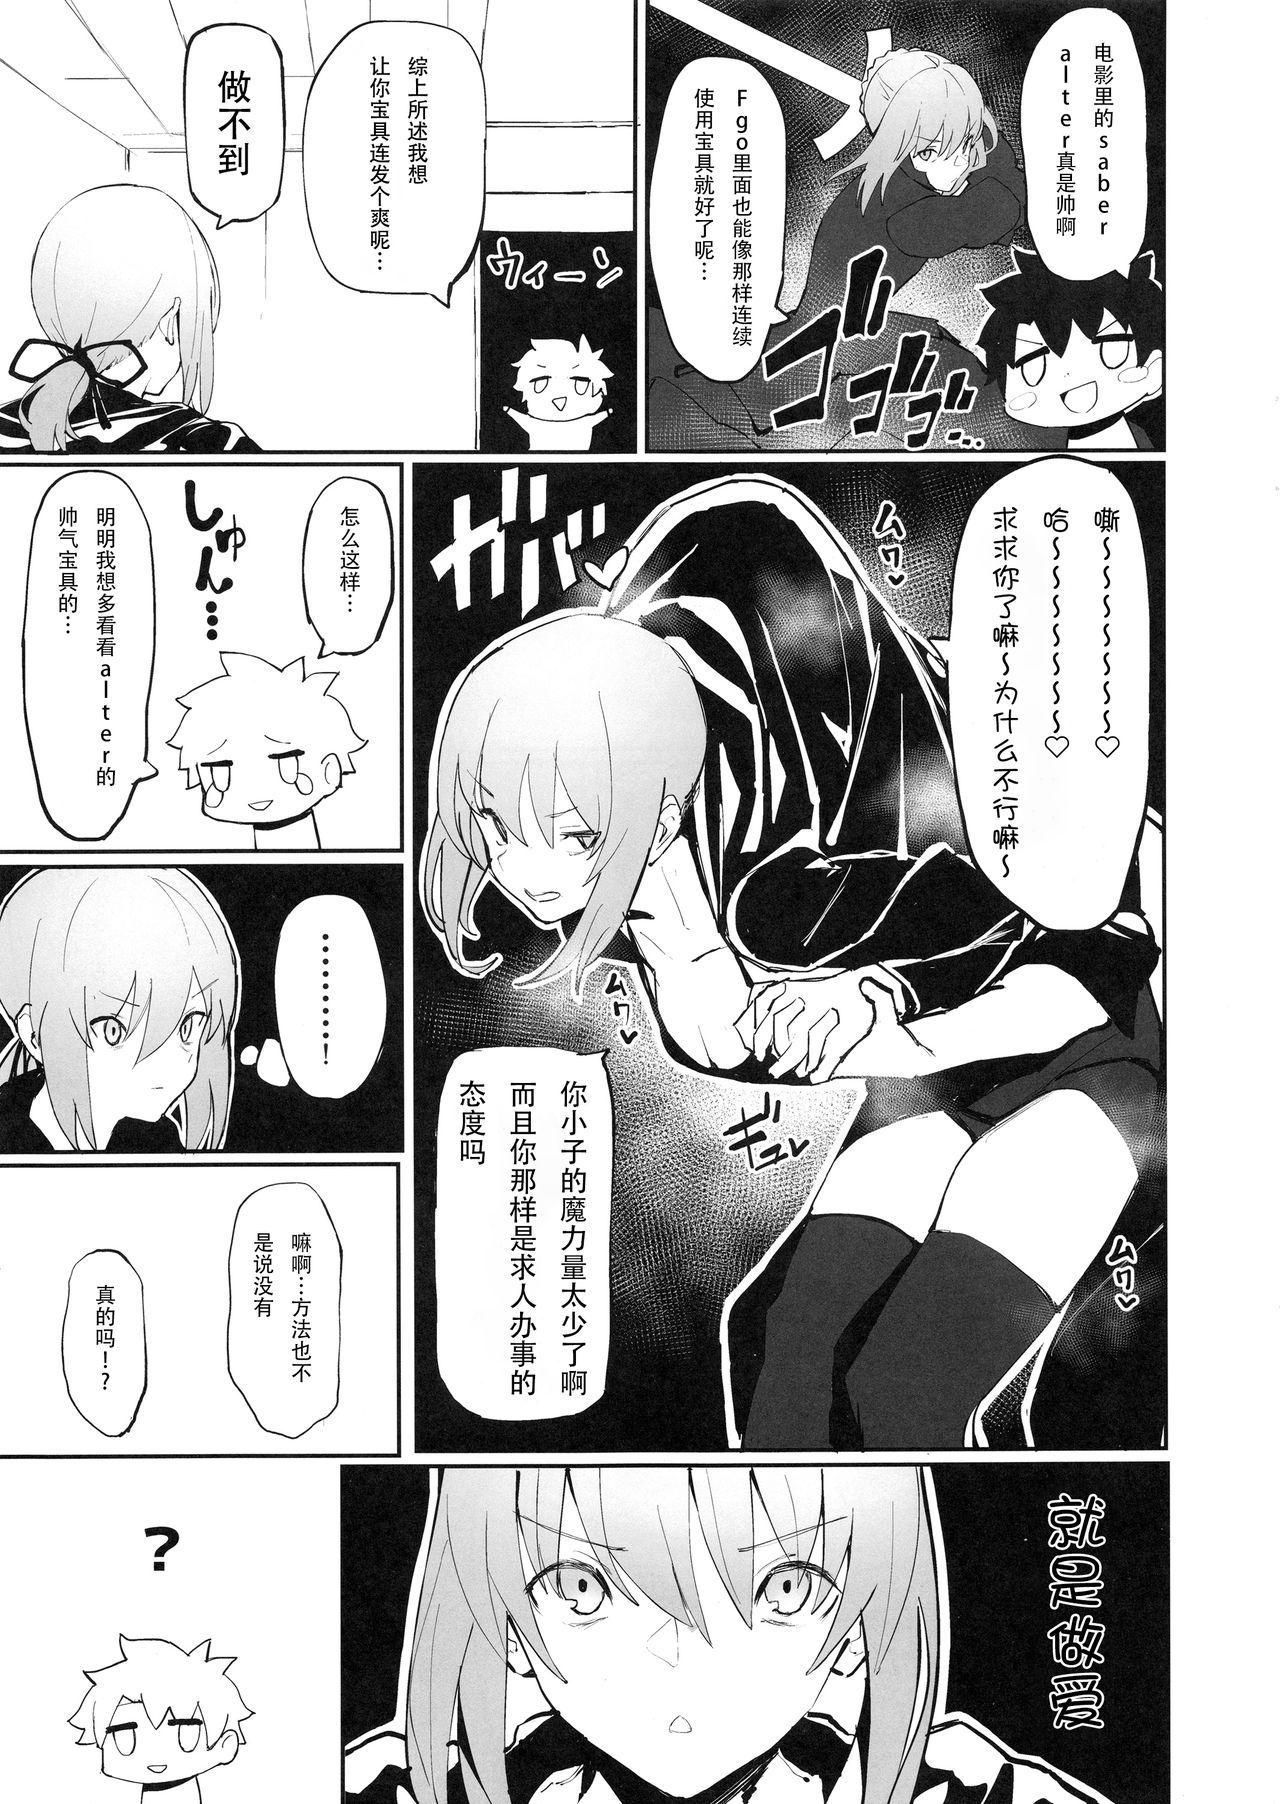 Muscular Saber Alter to Maryoku Kyoukyuu | 和saber alter的魔力供给♡ - Fate grand order Sensual - Page 2